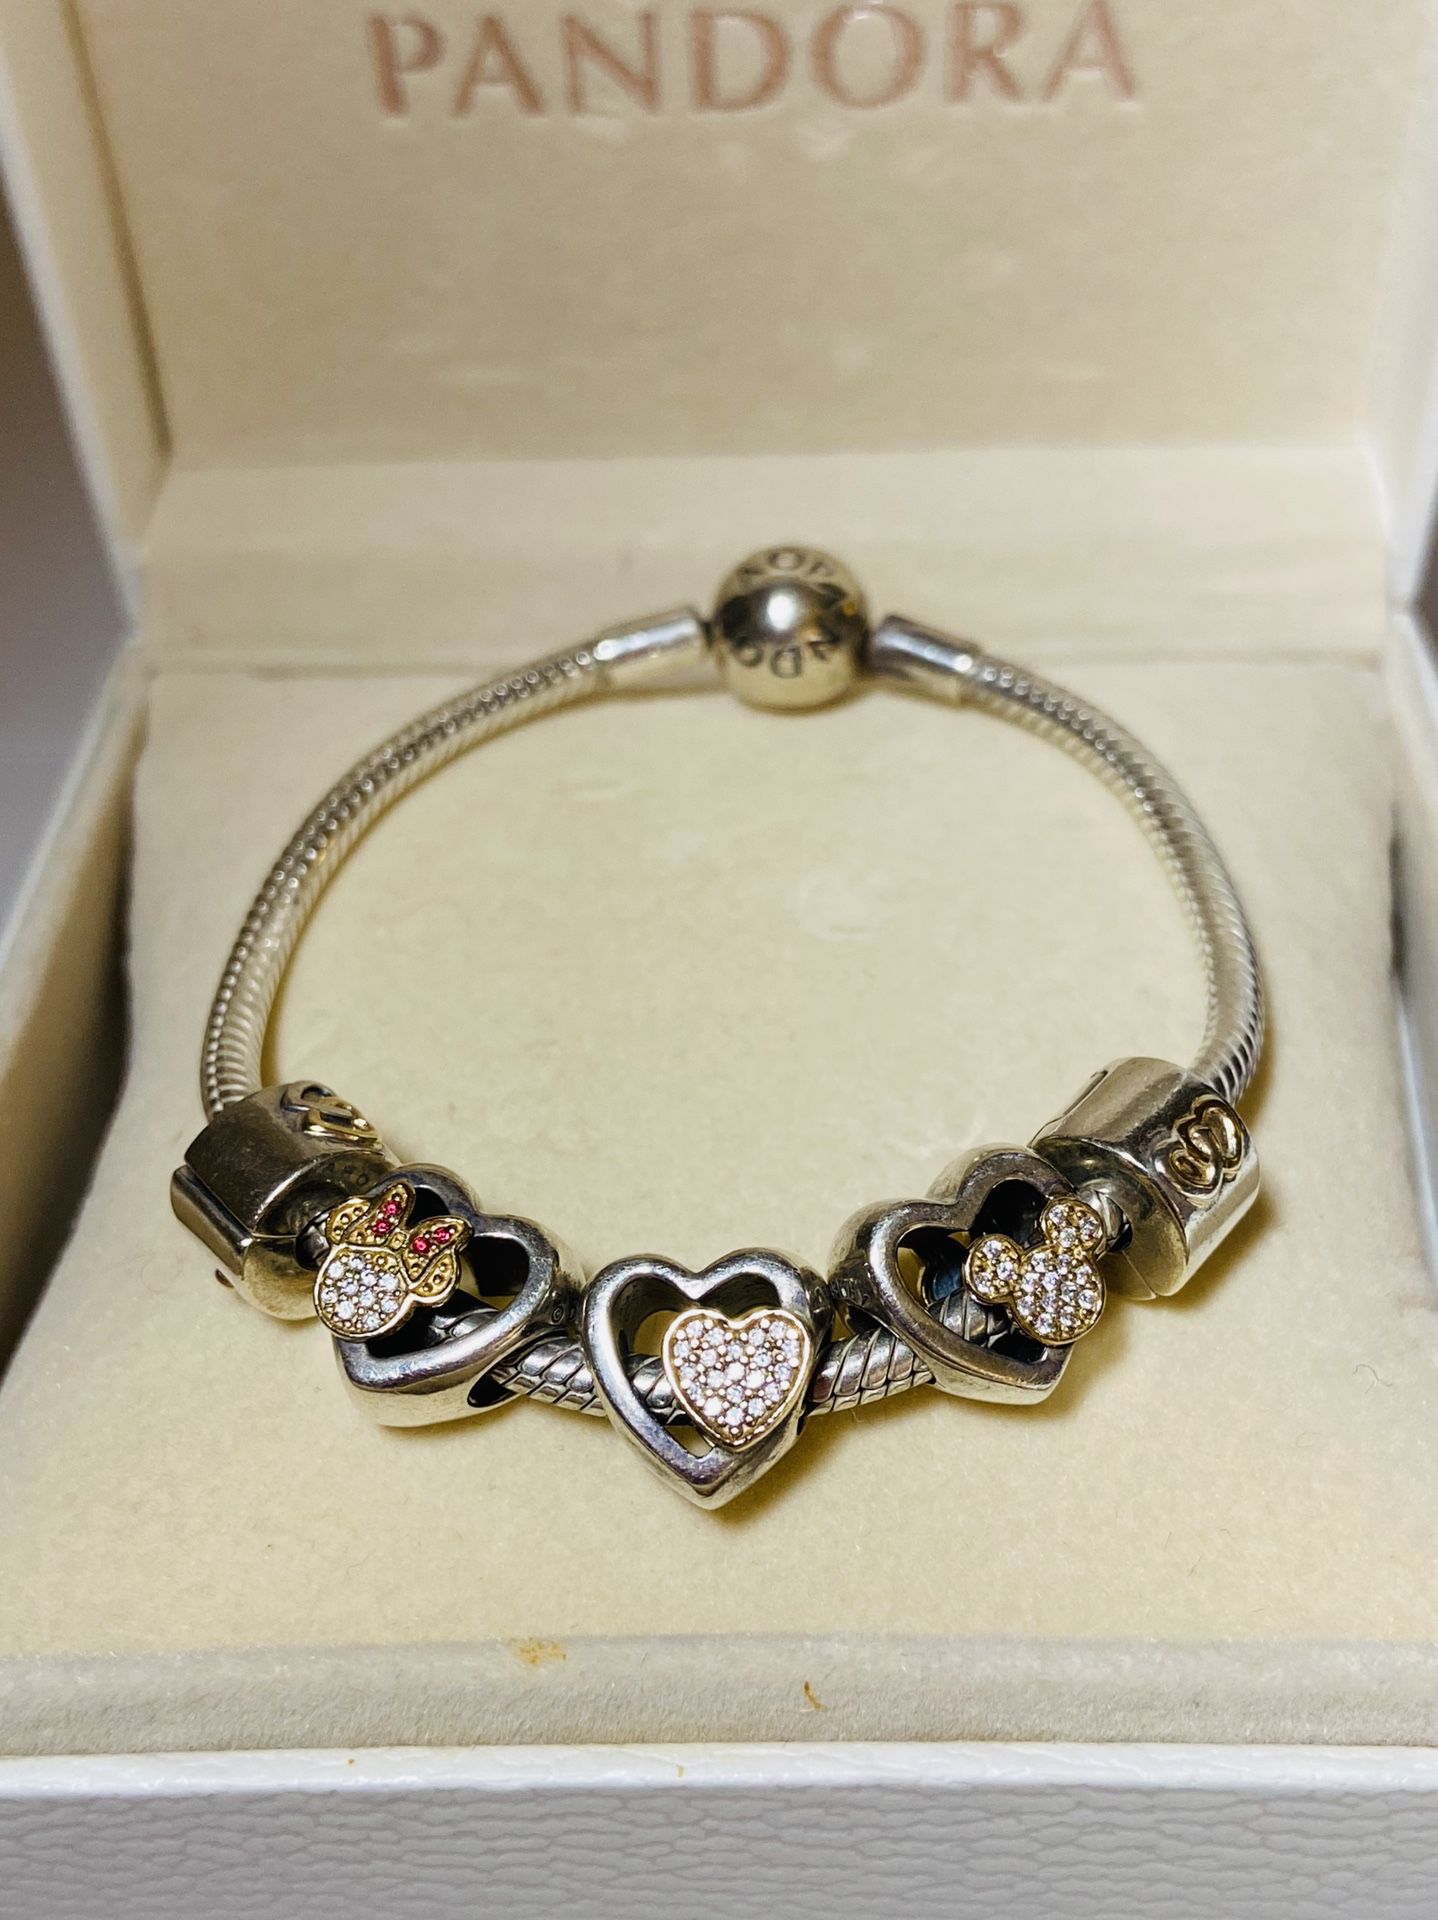 Pandora Bracelet 17 cm - Limited Edition - Mickey and Minnie Charms - Diamonds,Silver and Gold